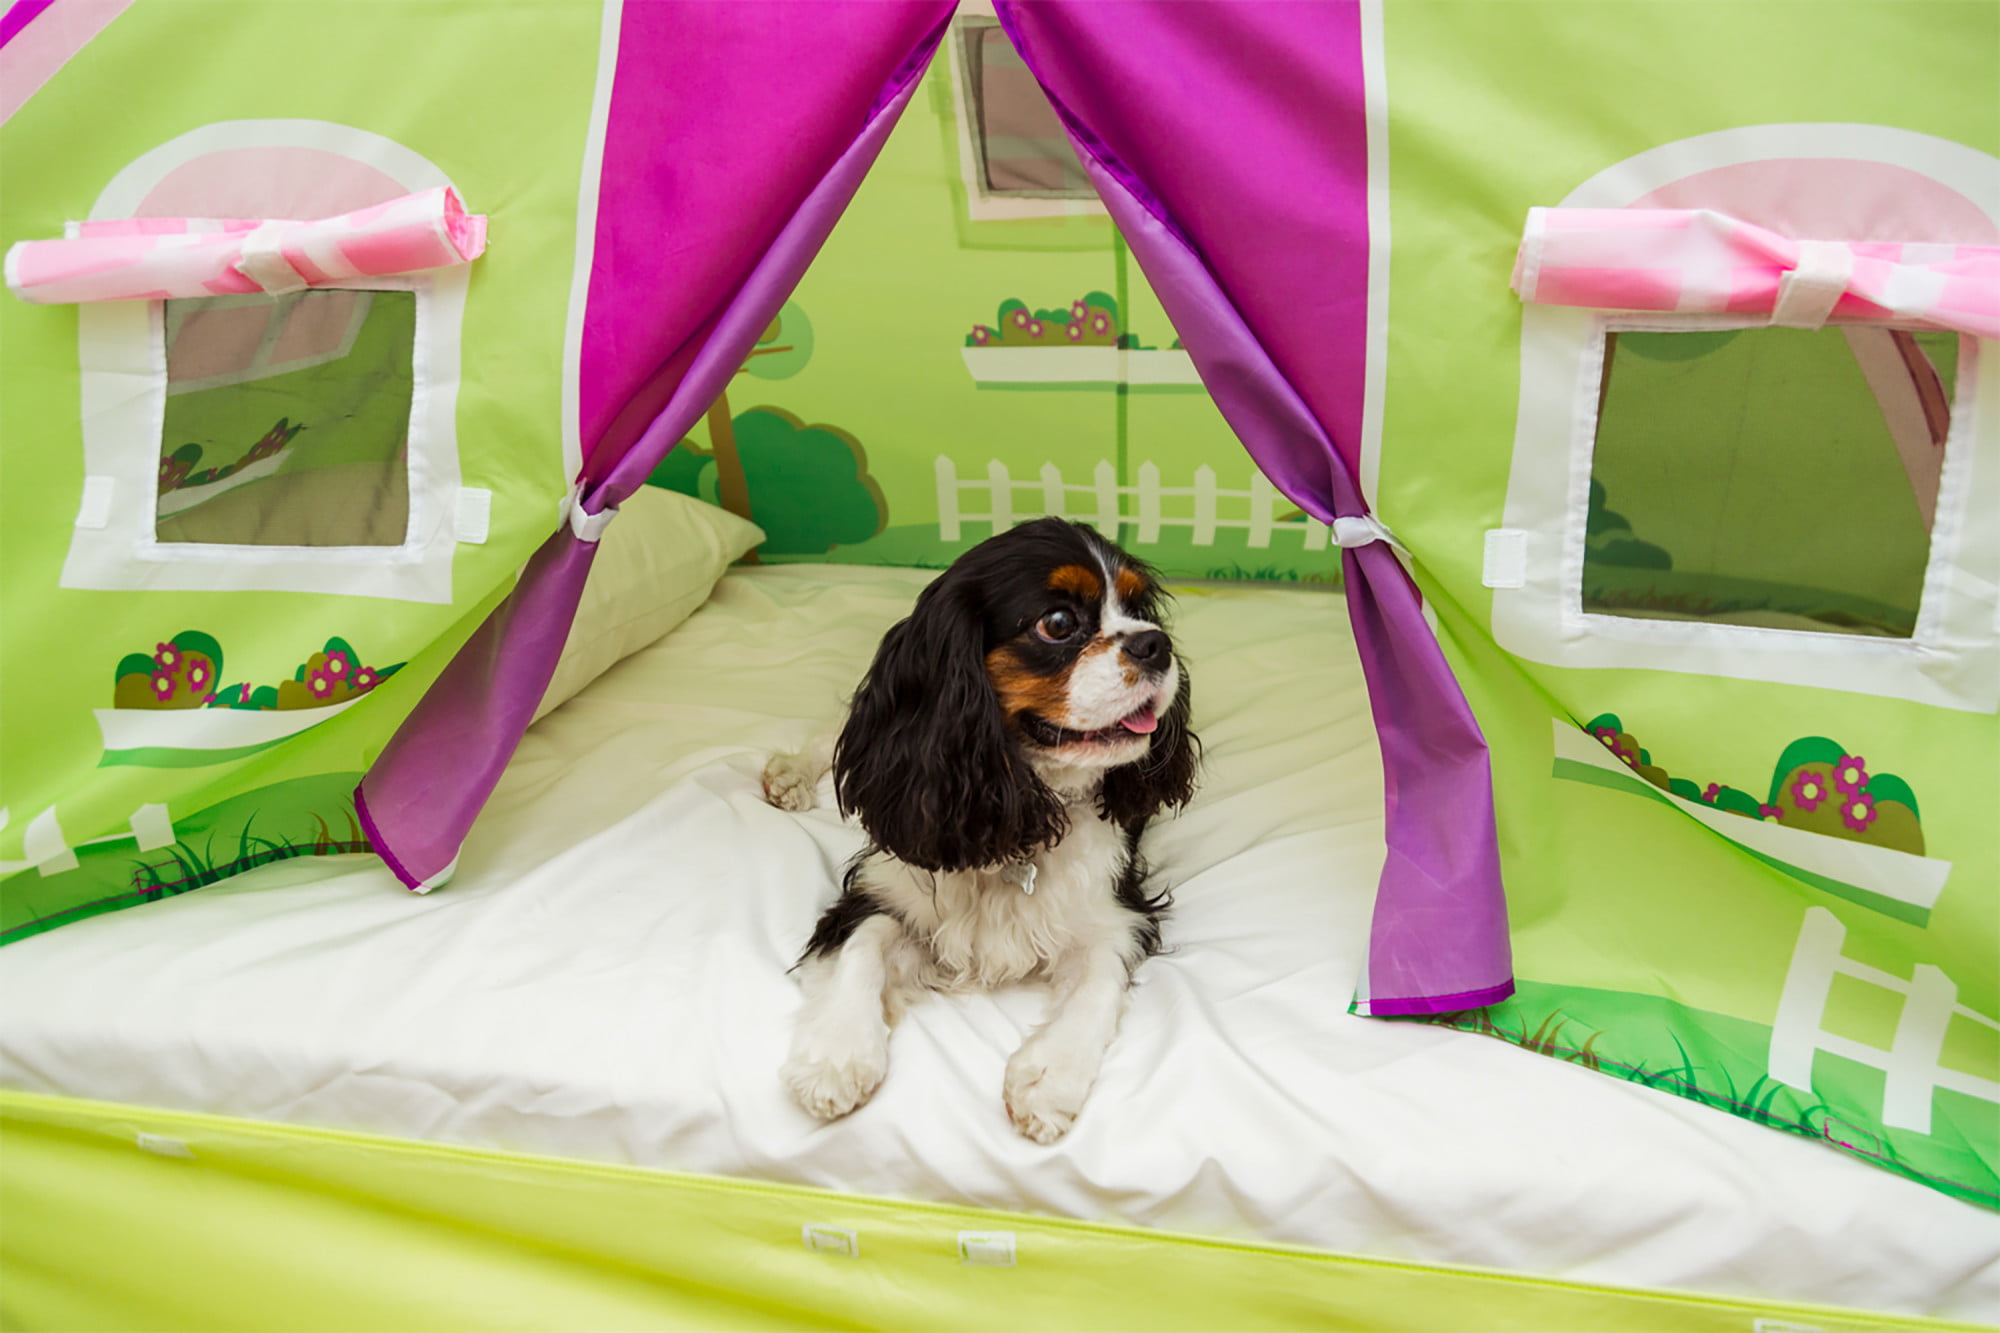 T-ポイント5倍】 Pacific Play Tents Cottage Bed Tent Twin%ｶﾝﾏ% 19600 並行輸入品 